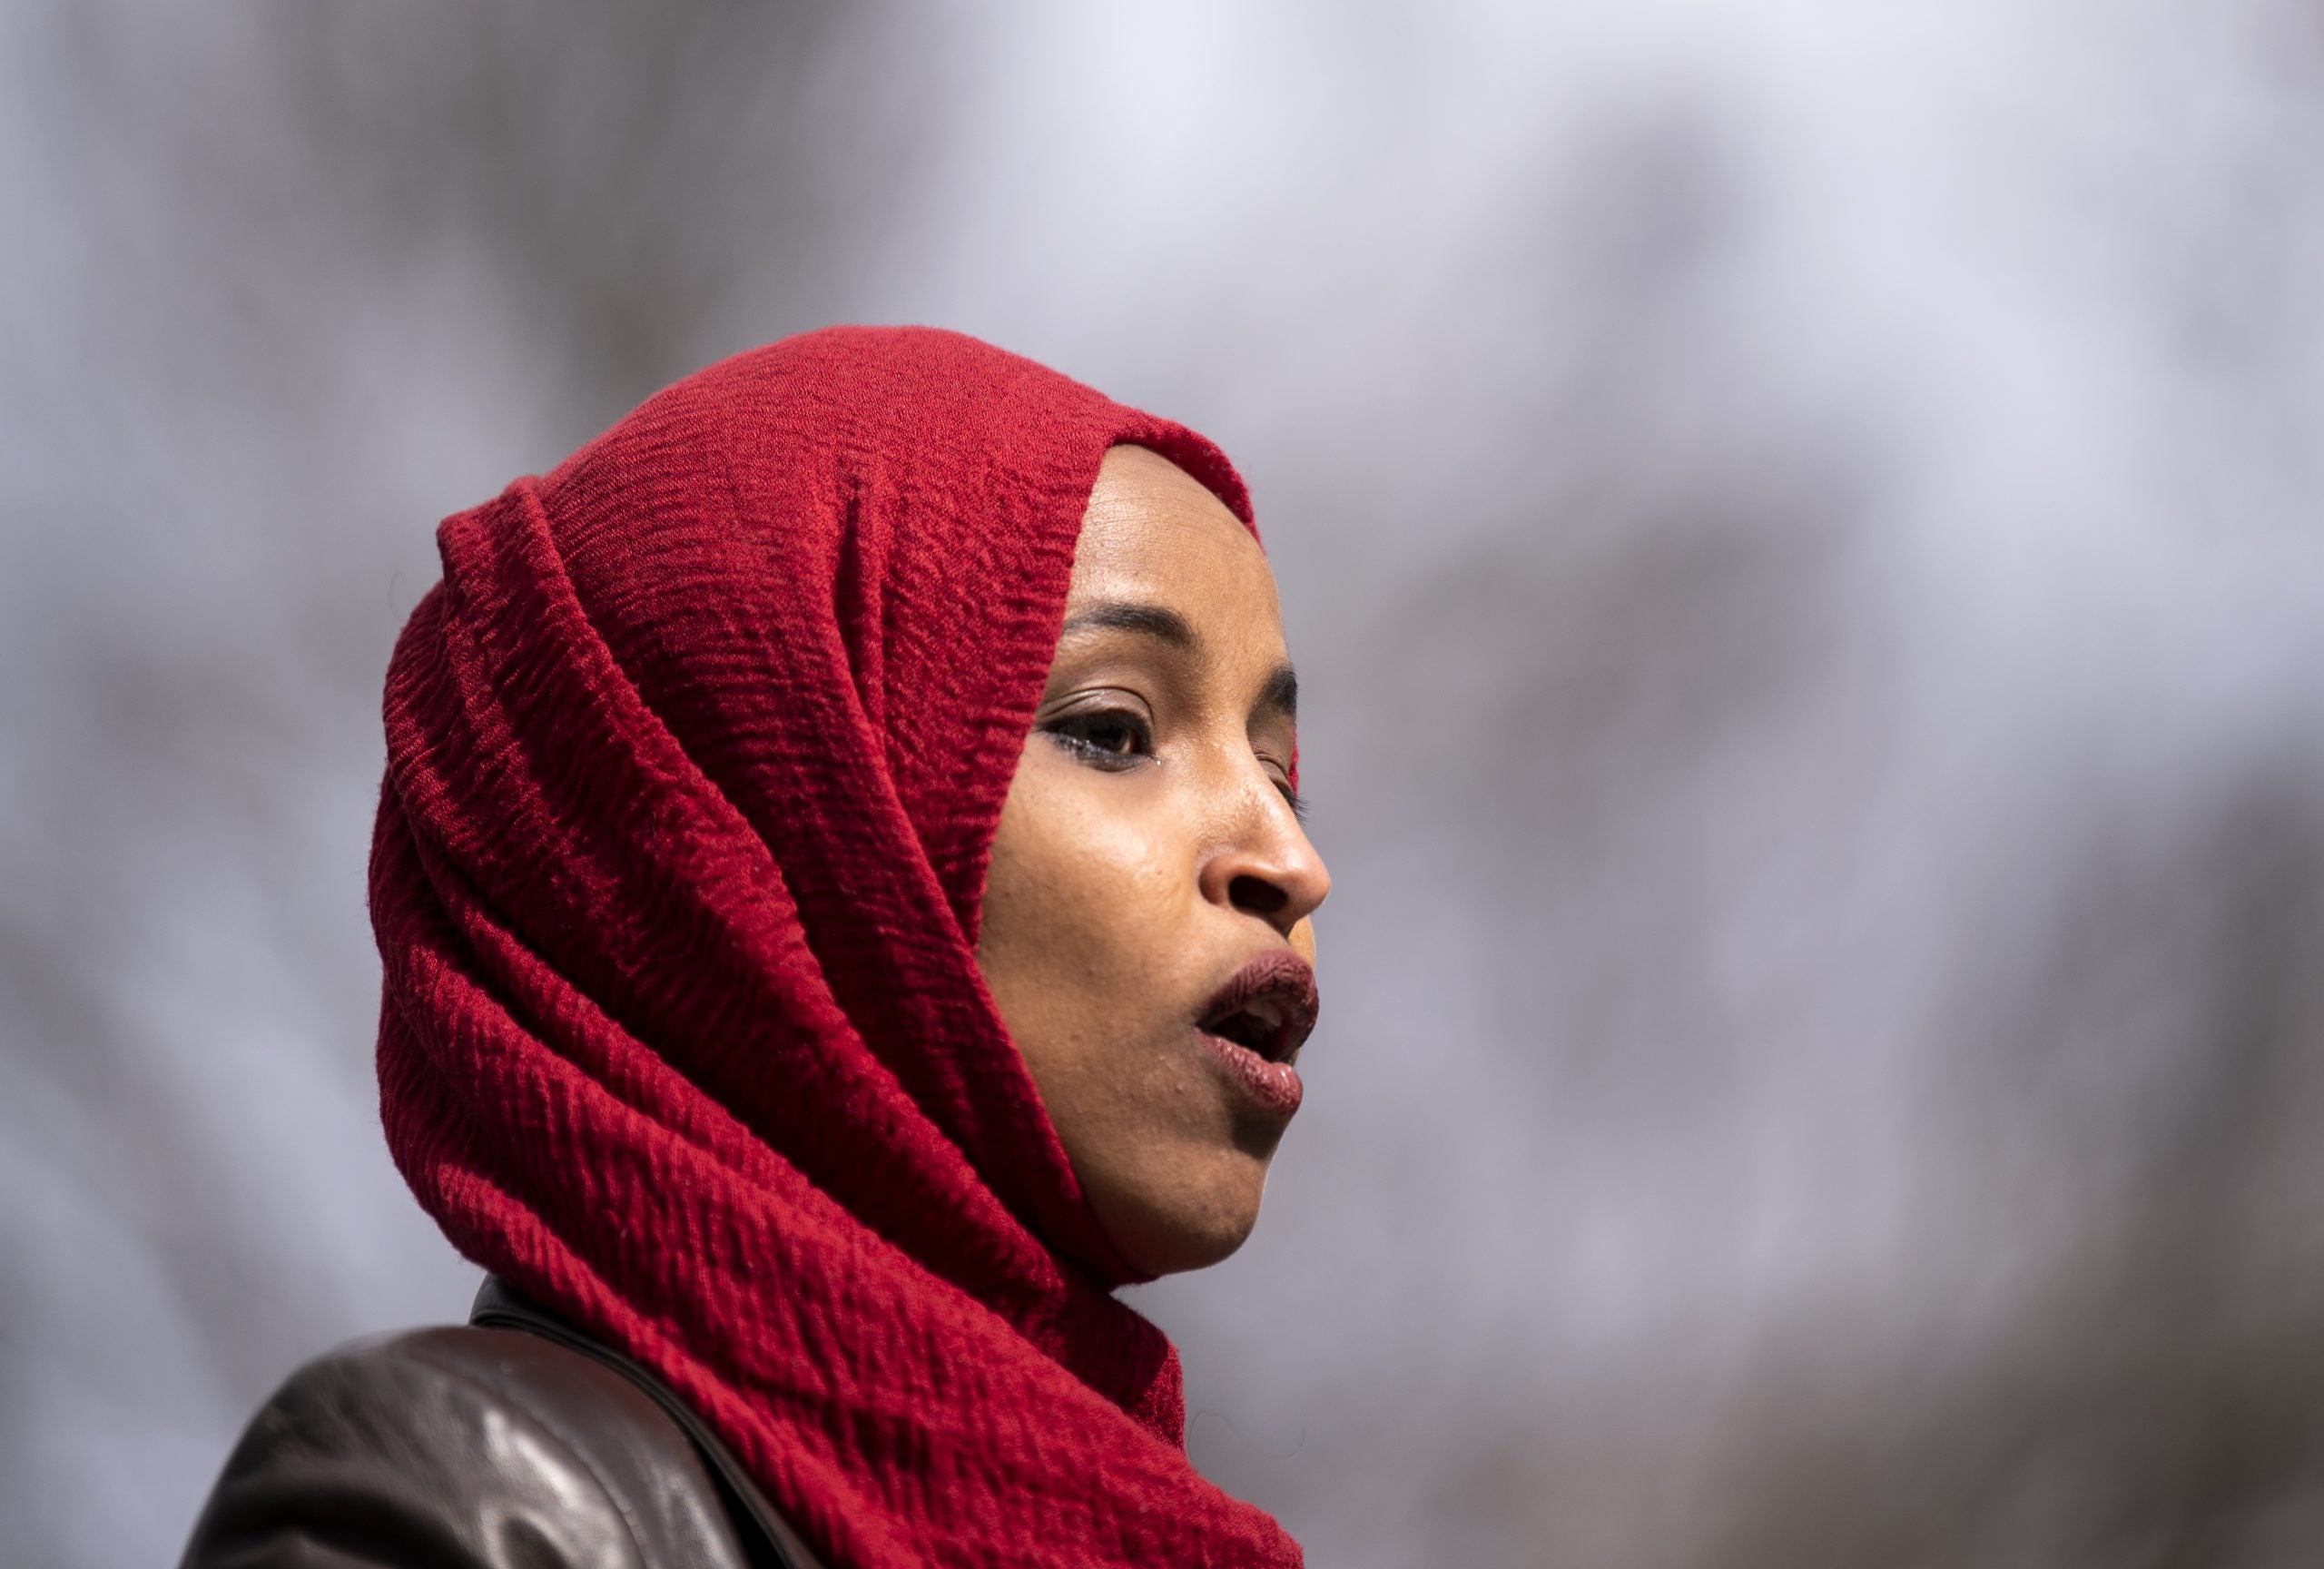 Rep. Ilhan Omar Speaks Out Against U.S., Israel  Human Rights Violations, Faces Backlash